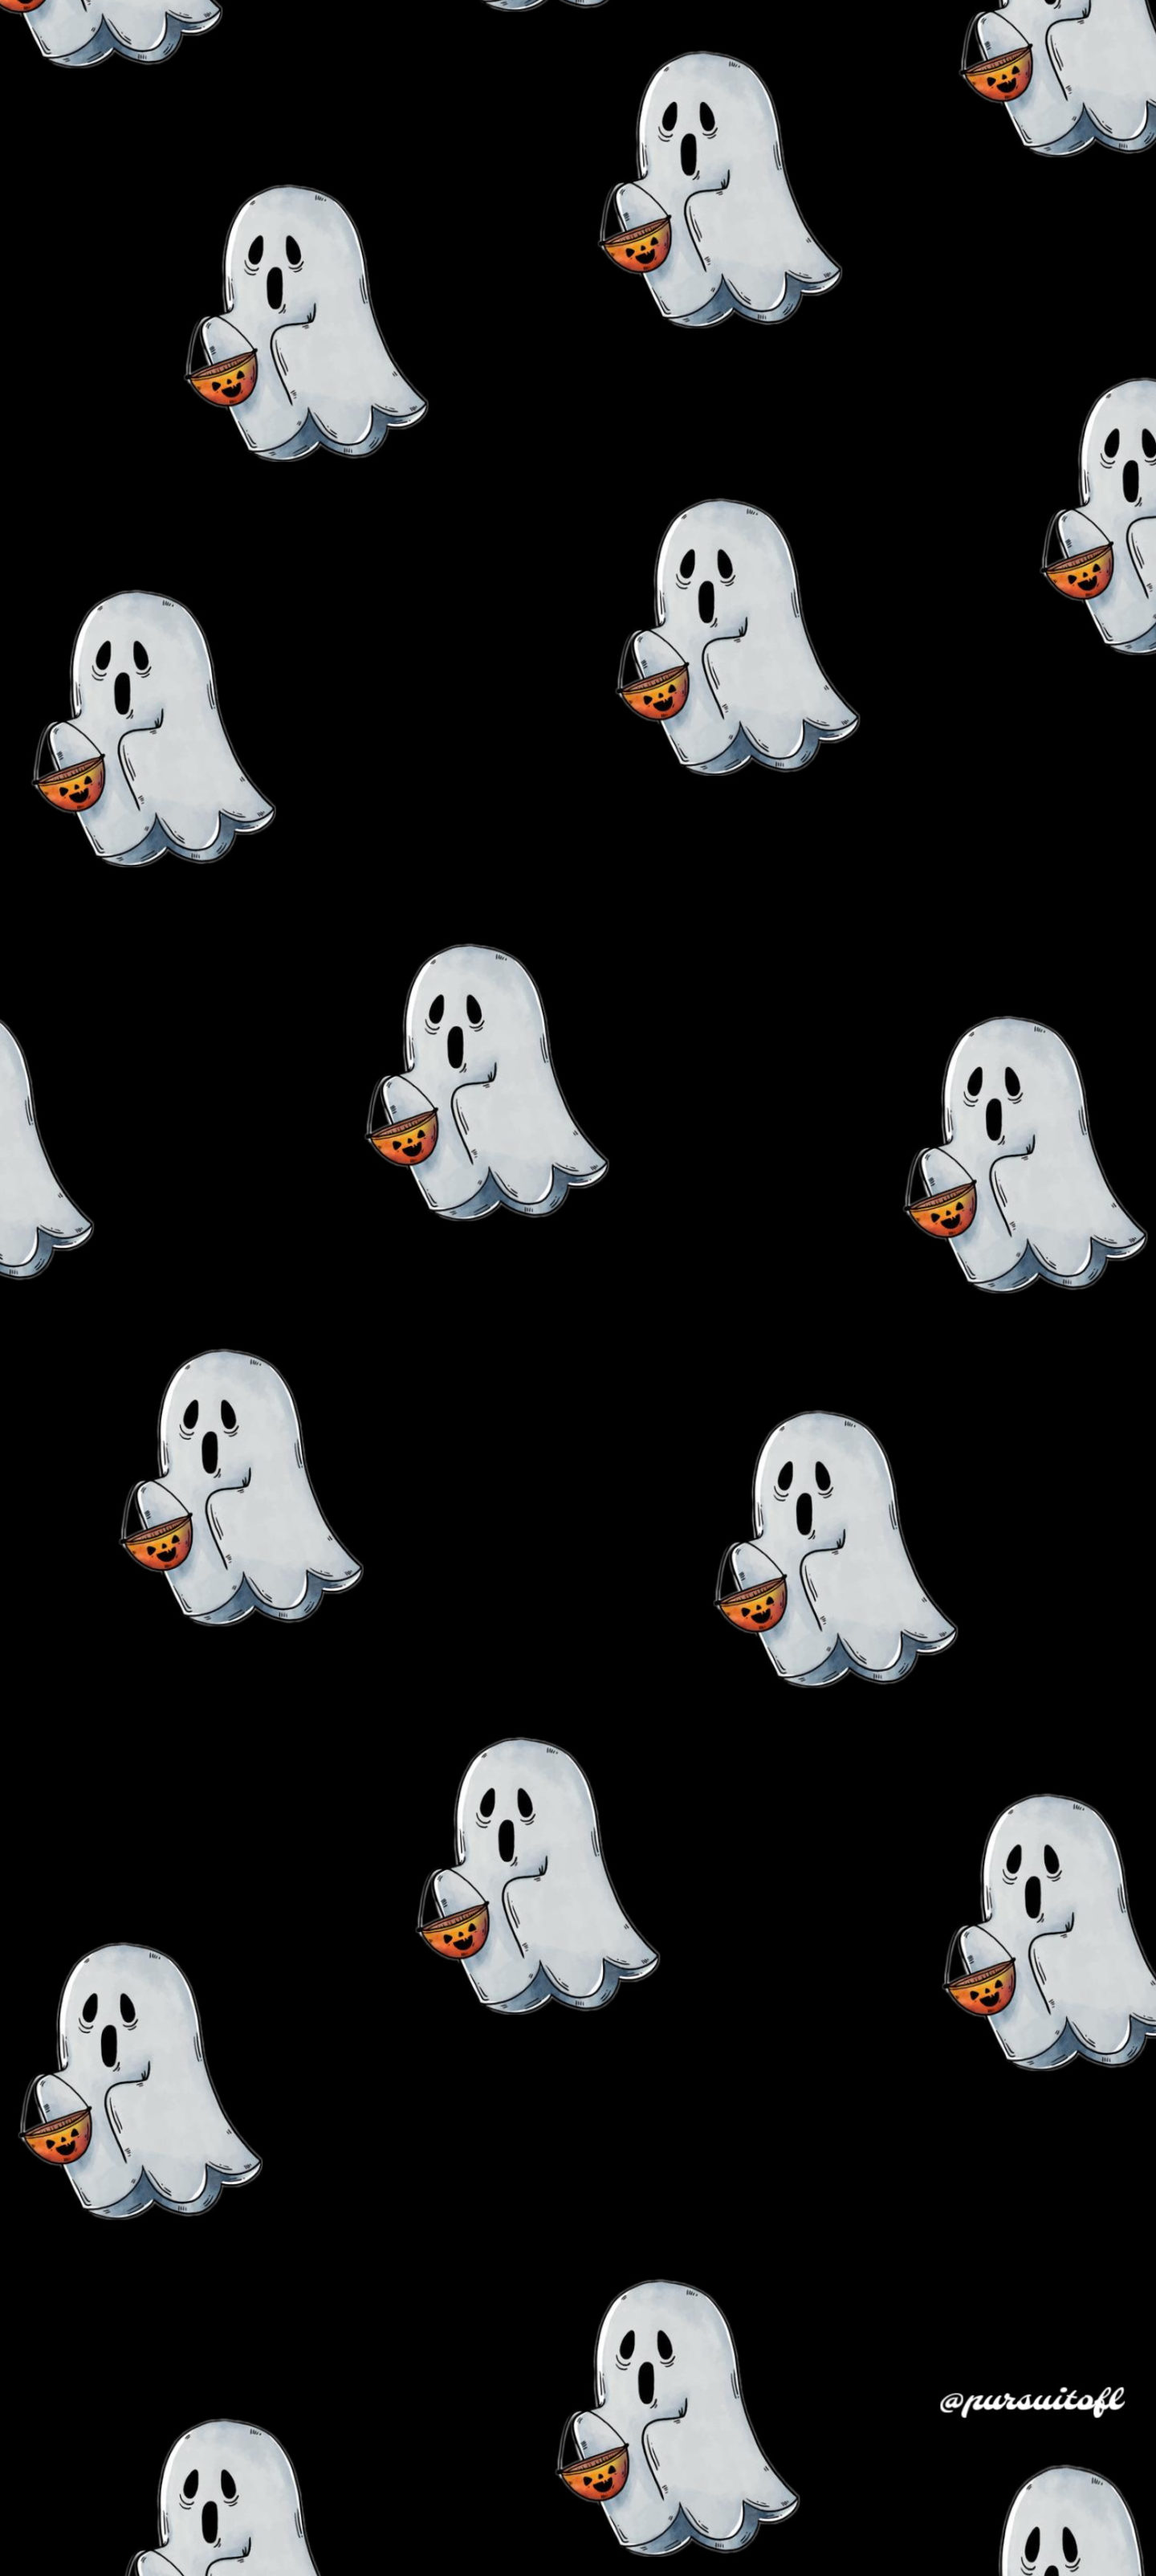 Black Phone wallpaper with small halloween ghosts holding a trick-or-treat pumpkin